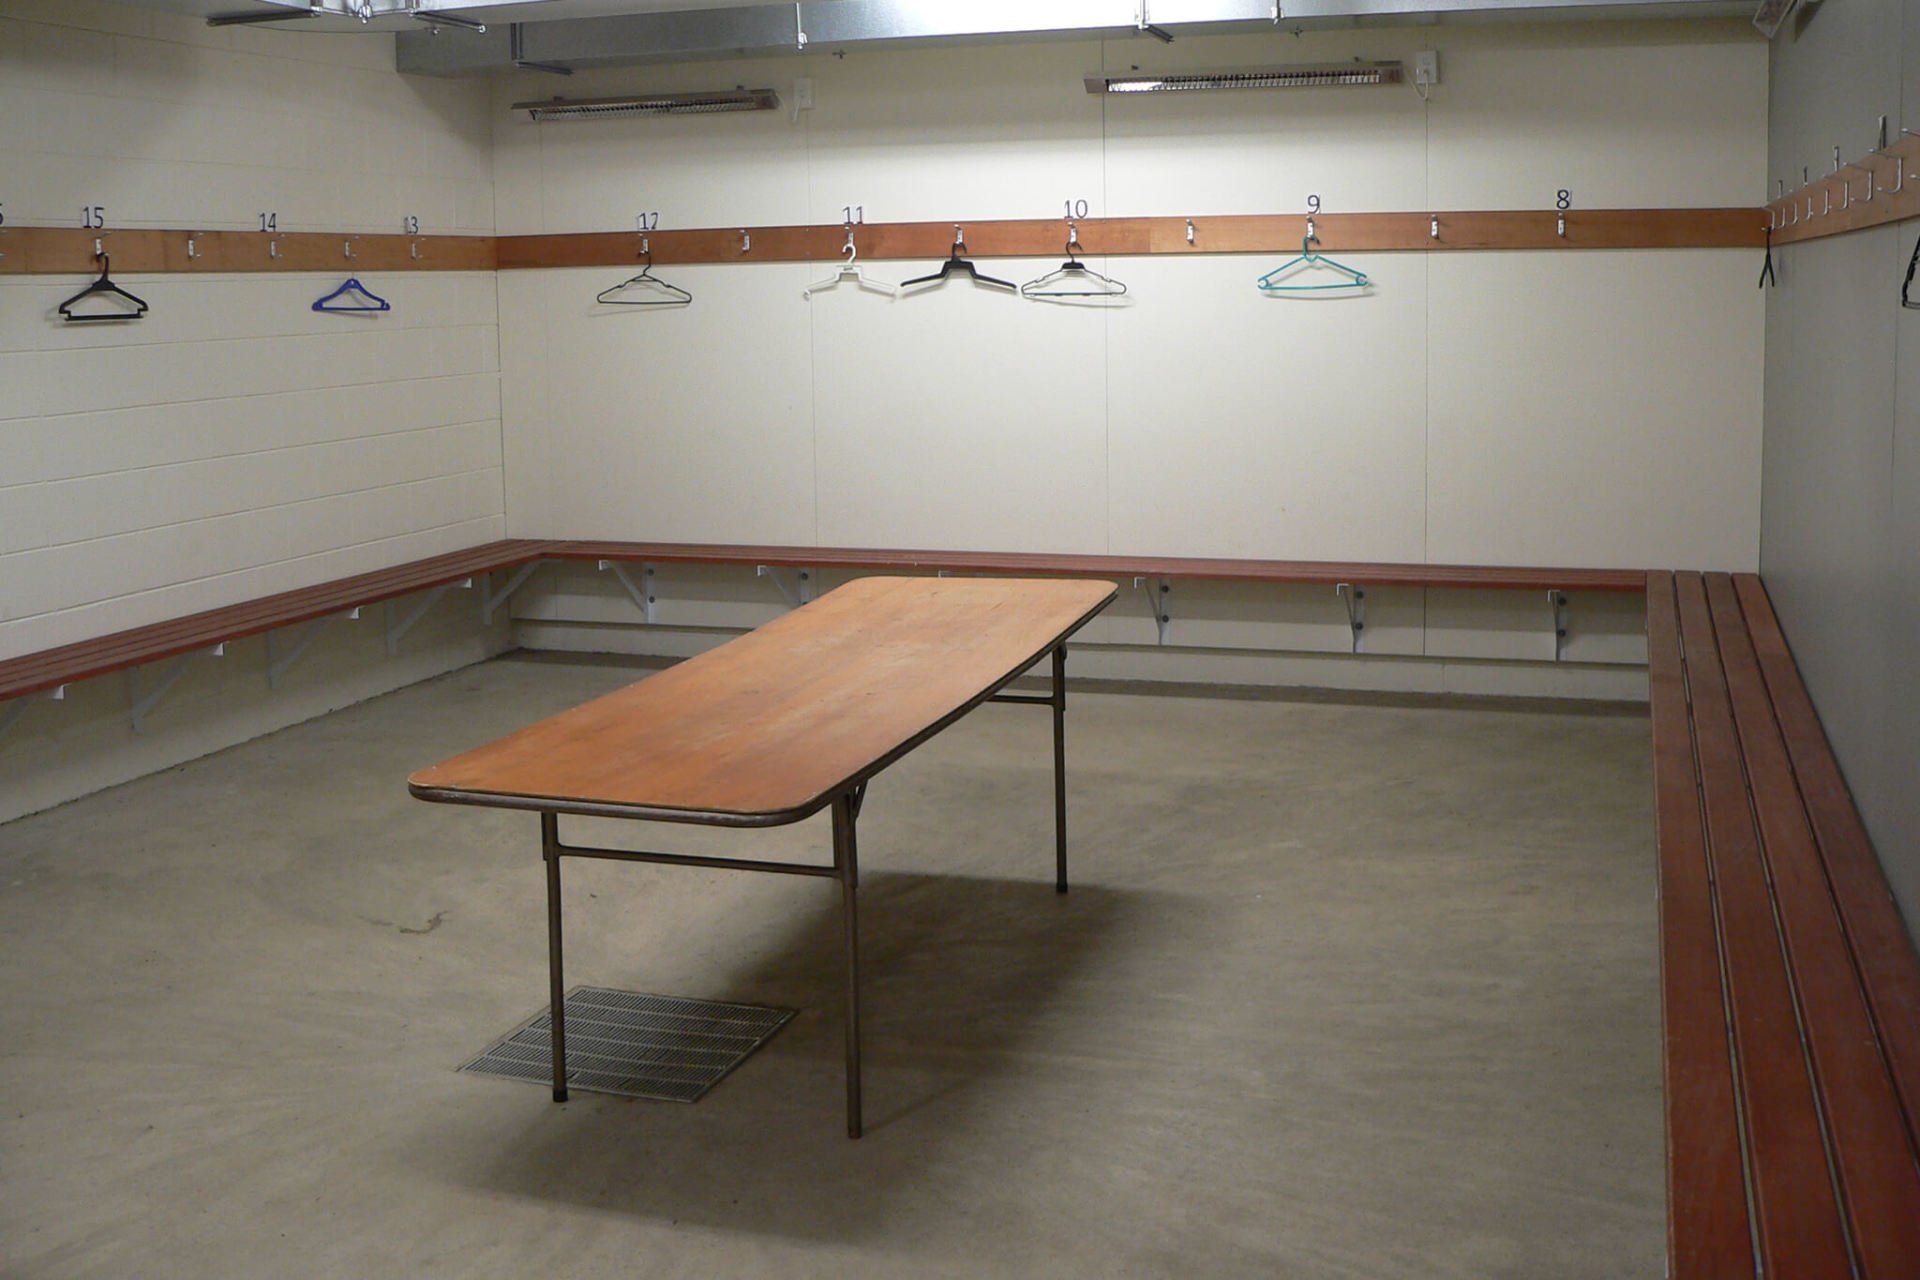 The Changing Rooms at Endeavour Park Pavilion in Picton